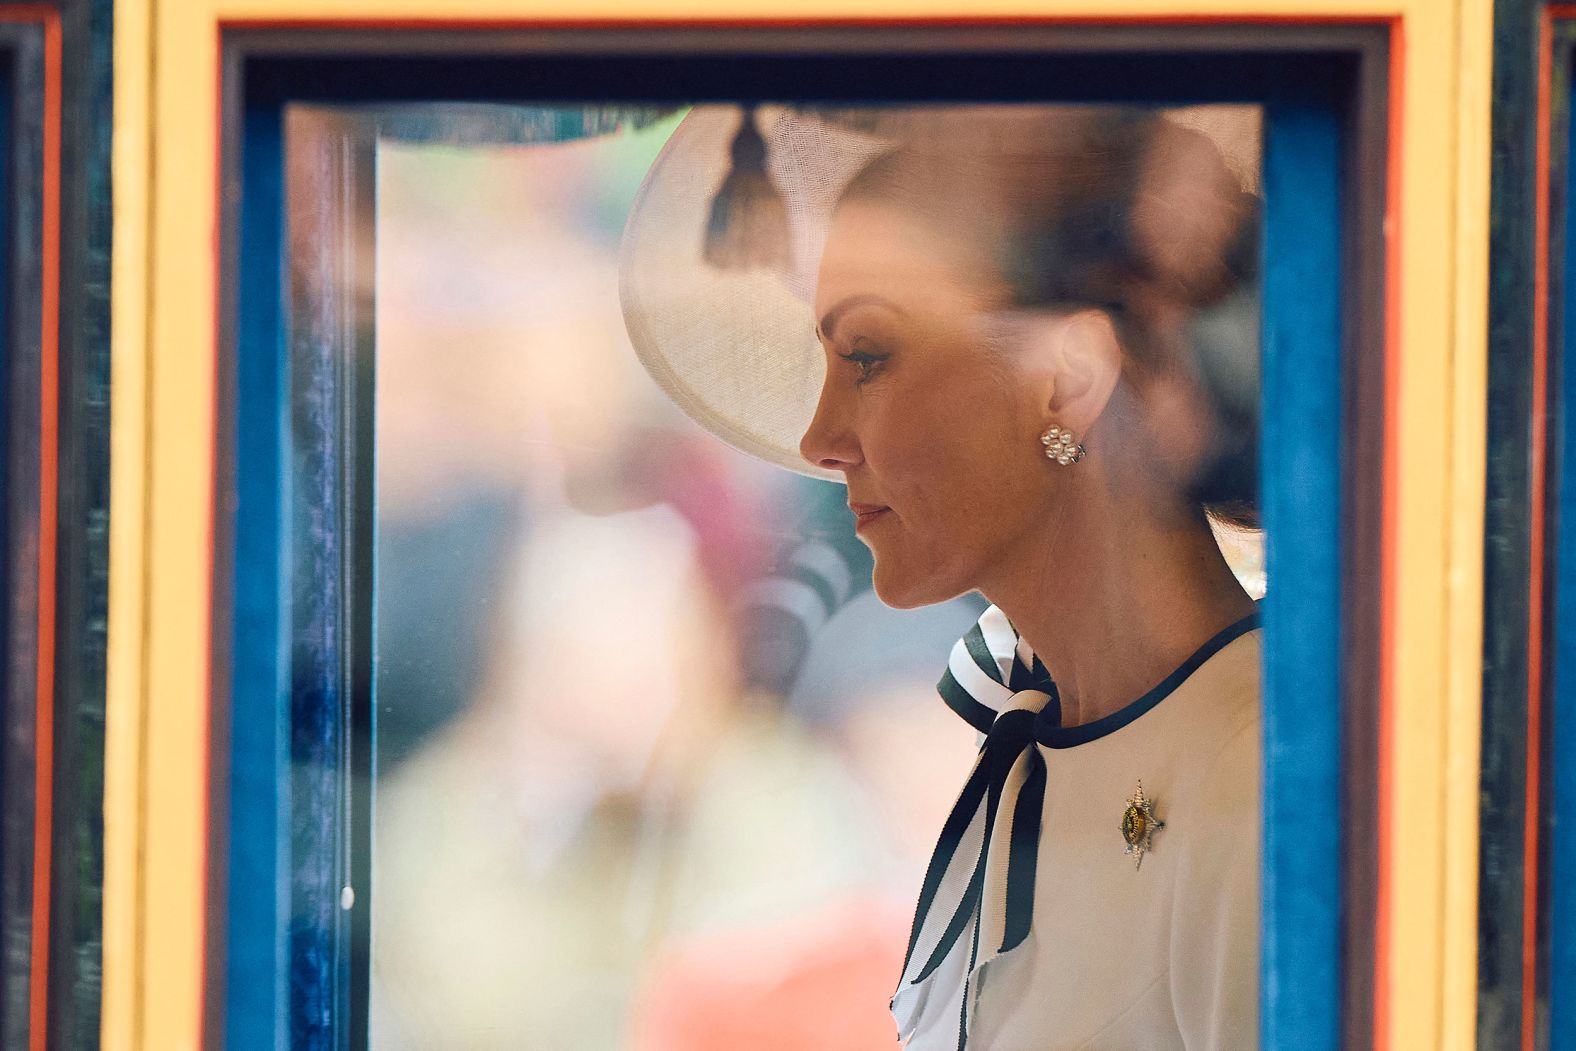 Catherine, <a href="https://www.cnn.com/2024/03/22/europe/gallery/catherine-princess-of-wales/index.html">Princess of Wales</a>, rides the Glass State Coach in London during the annual Trooping the Colour parade on Saturday, June 15. She also joined other British royals on the balcony of Buckingham Palace in what was <a href="https://www.cnn.com/2024/06/15/uk/trooping-the-colour-princess-kate-intl-scli-gbr/index.html">her first public appearance since being diagnosed with cancer</a>. A day earlier, <a href="https://www.cnn.com/2024/06/14/uk/catherine-princess-of-wales-cancer-update-appearance-gbr-intl/index.html">she said she was making “good progress” in her recovery</a> but expected her treatment to last for a few more months.